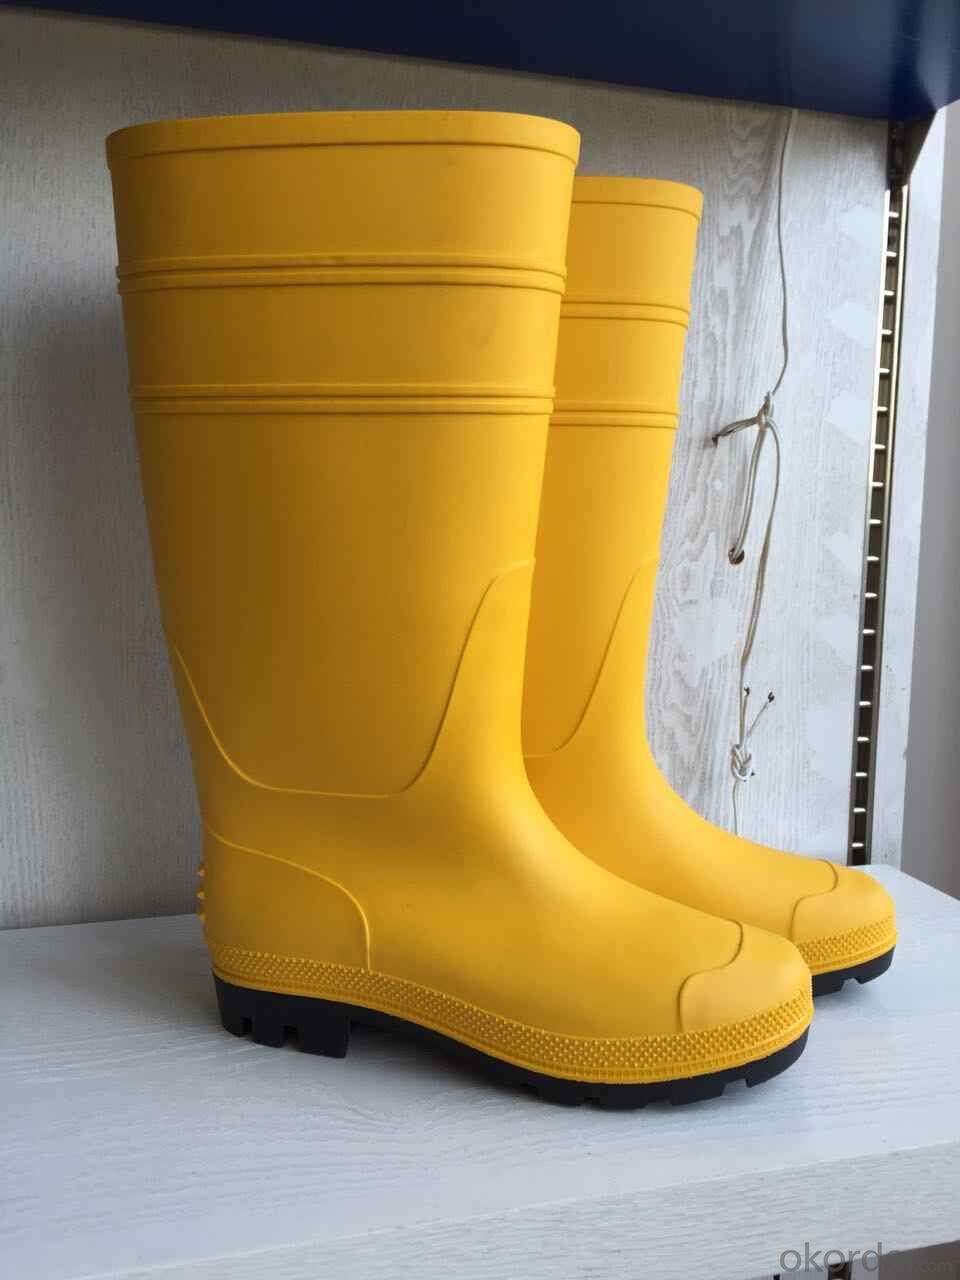 PVC Steel Toe Safety Boots Safety Work Boots